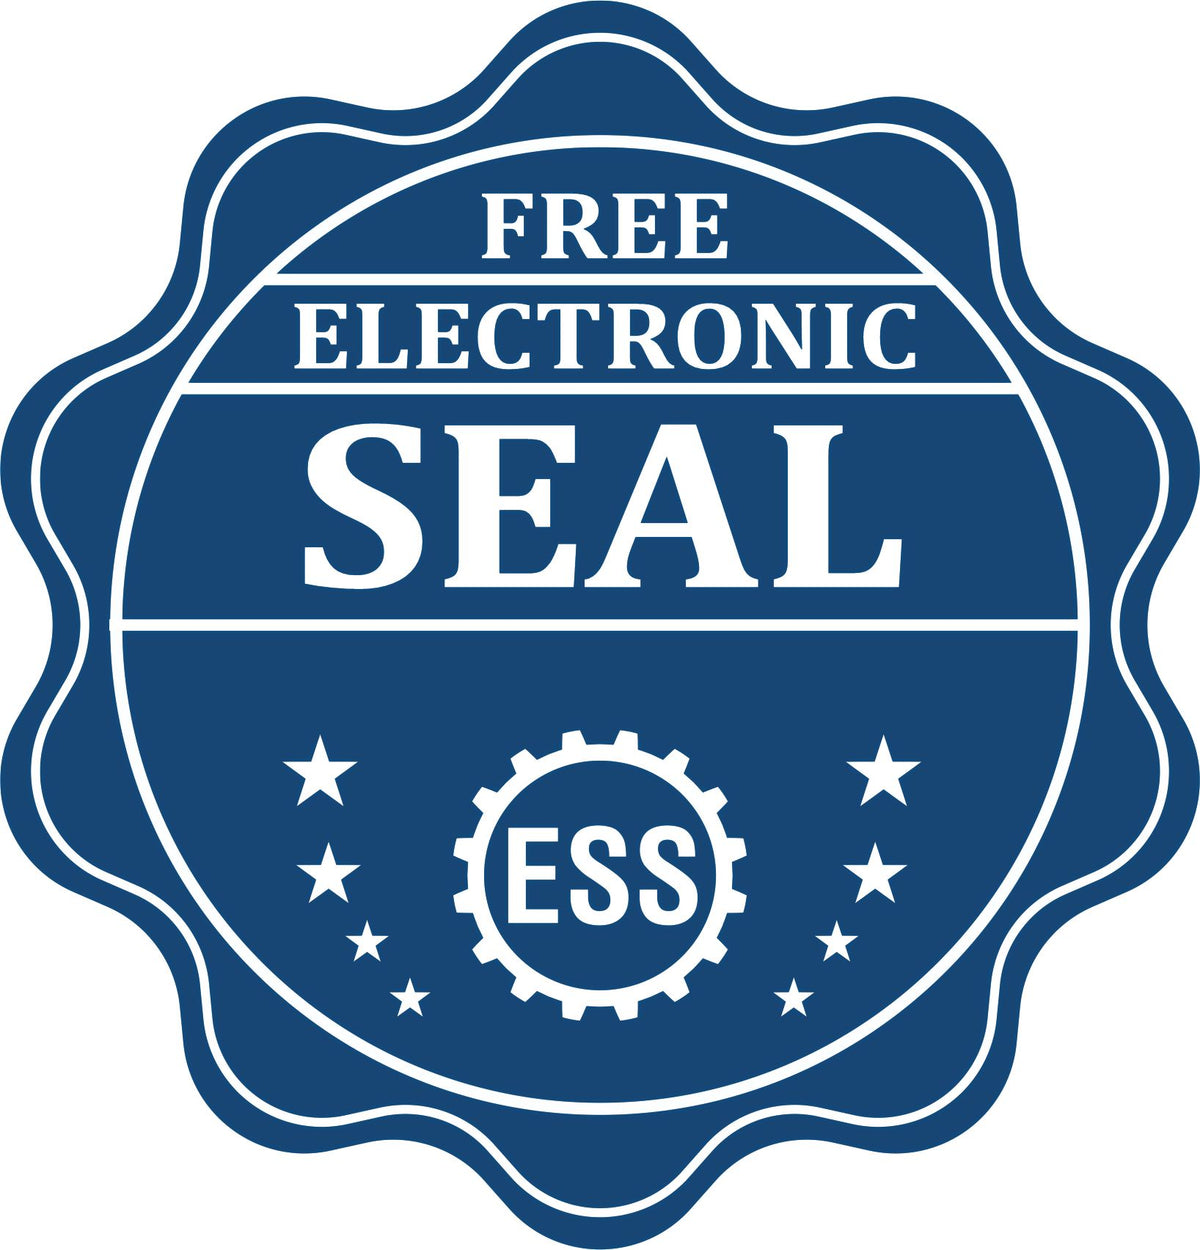 A badge showing a free electronic seal for the MaxLight Premium Pre-Inked Alaska State Seal Notarial Stamp with stars and the ESS gear on the emblem.